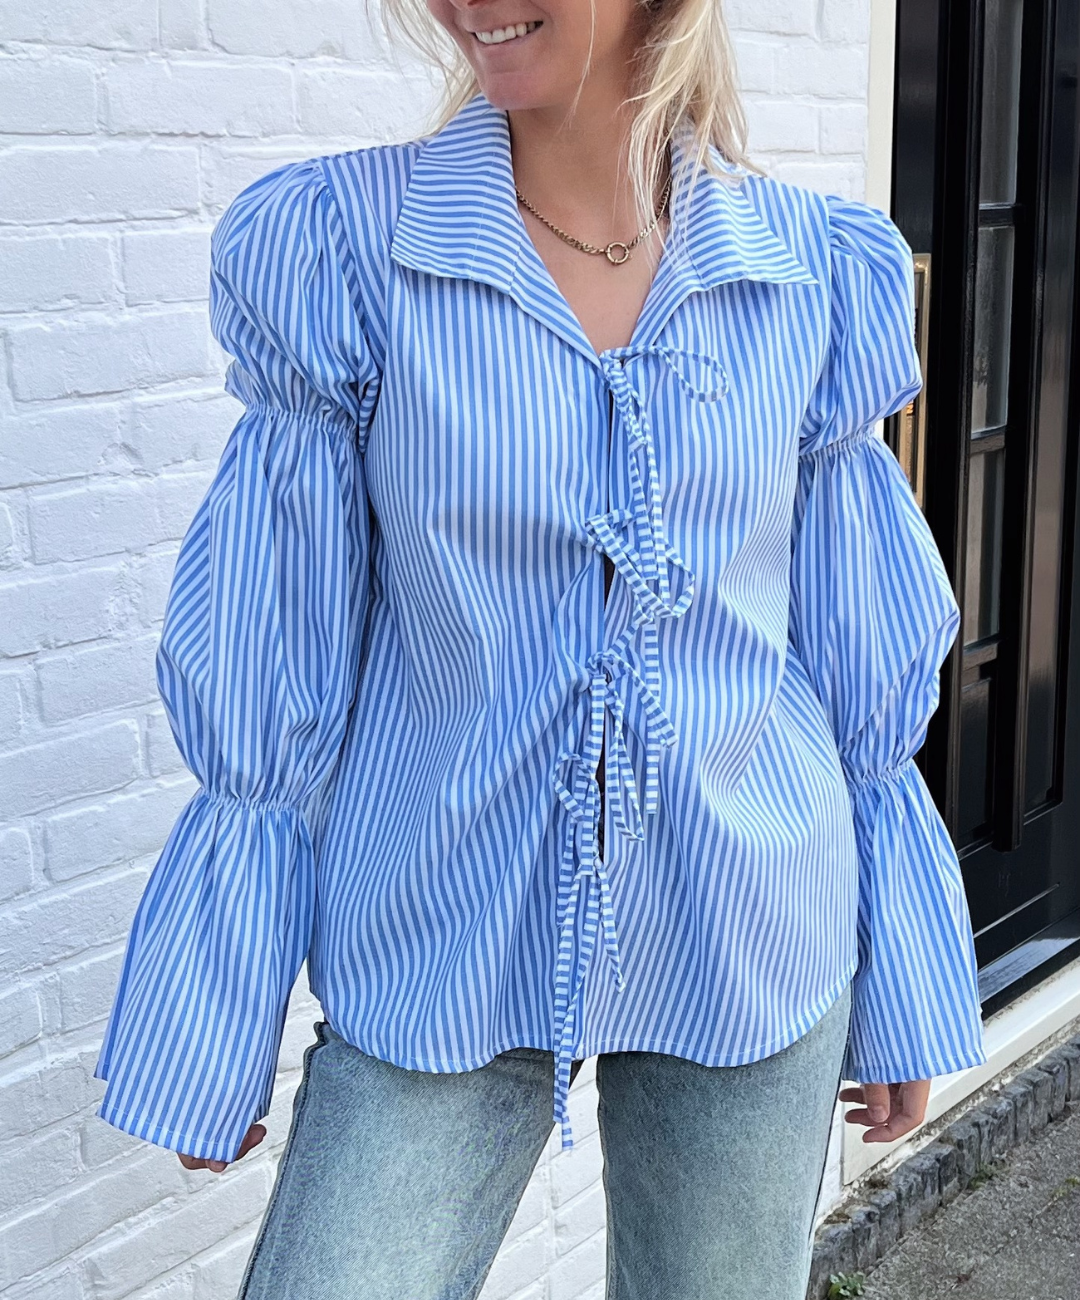 Nala blouse with bows | Tall | Blue striped